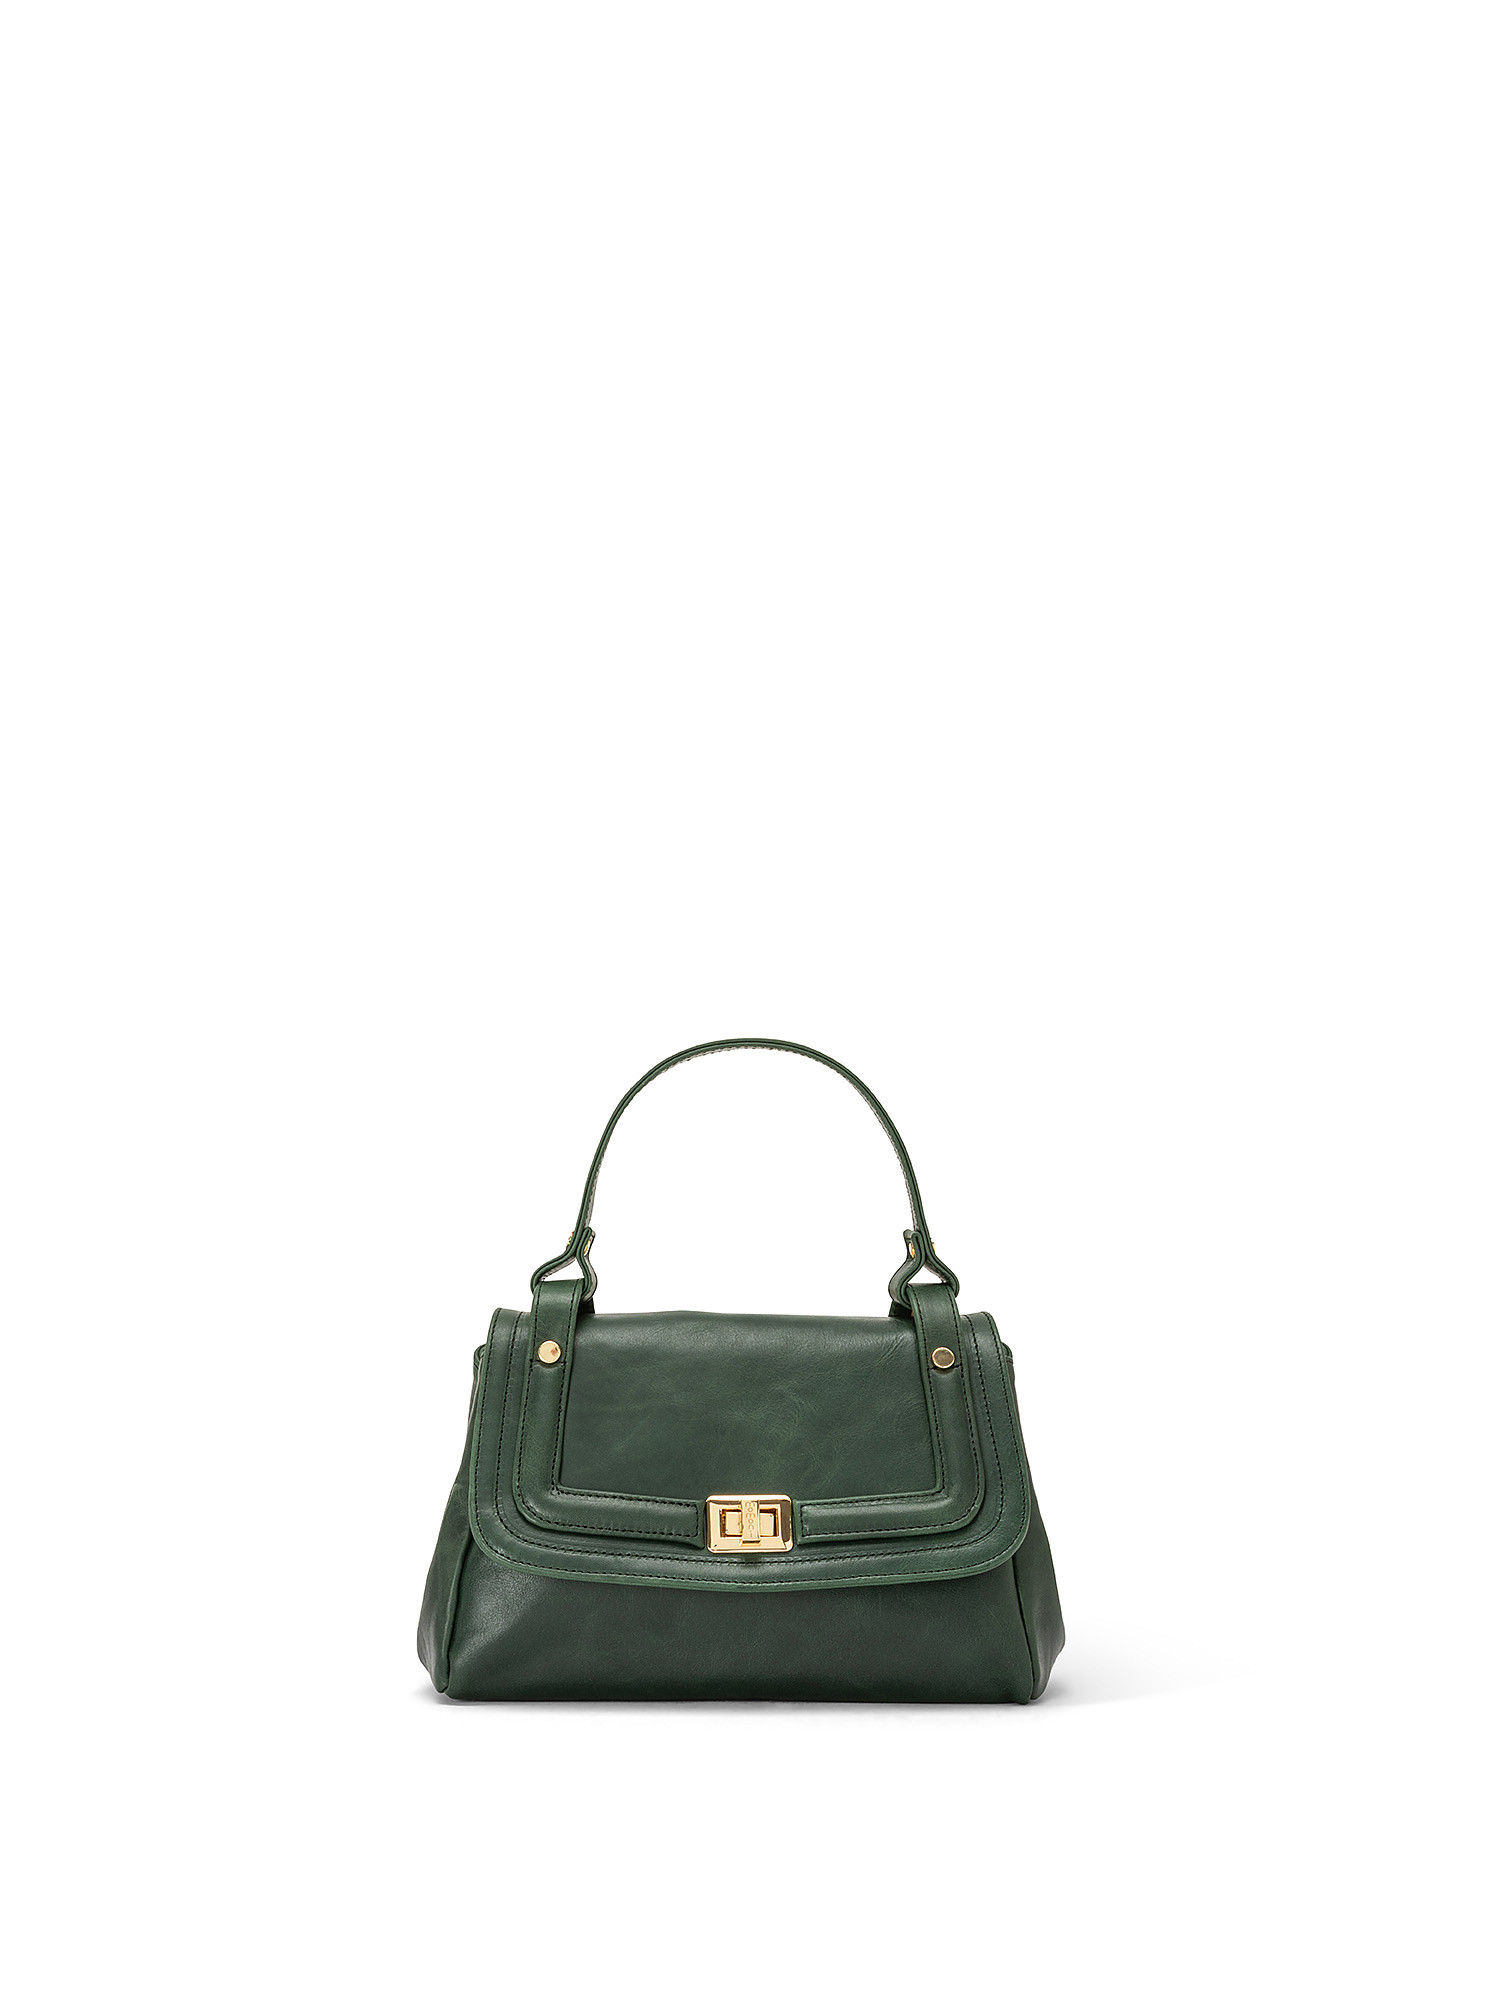 Petit Flore leather bag, Green, large image number 0